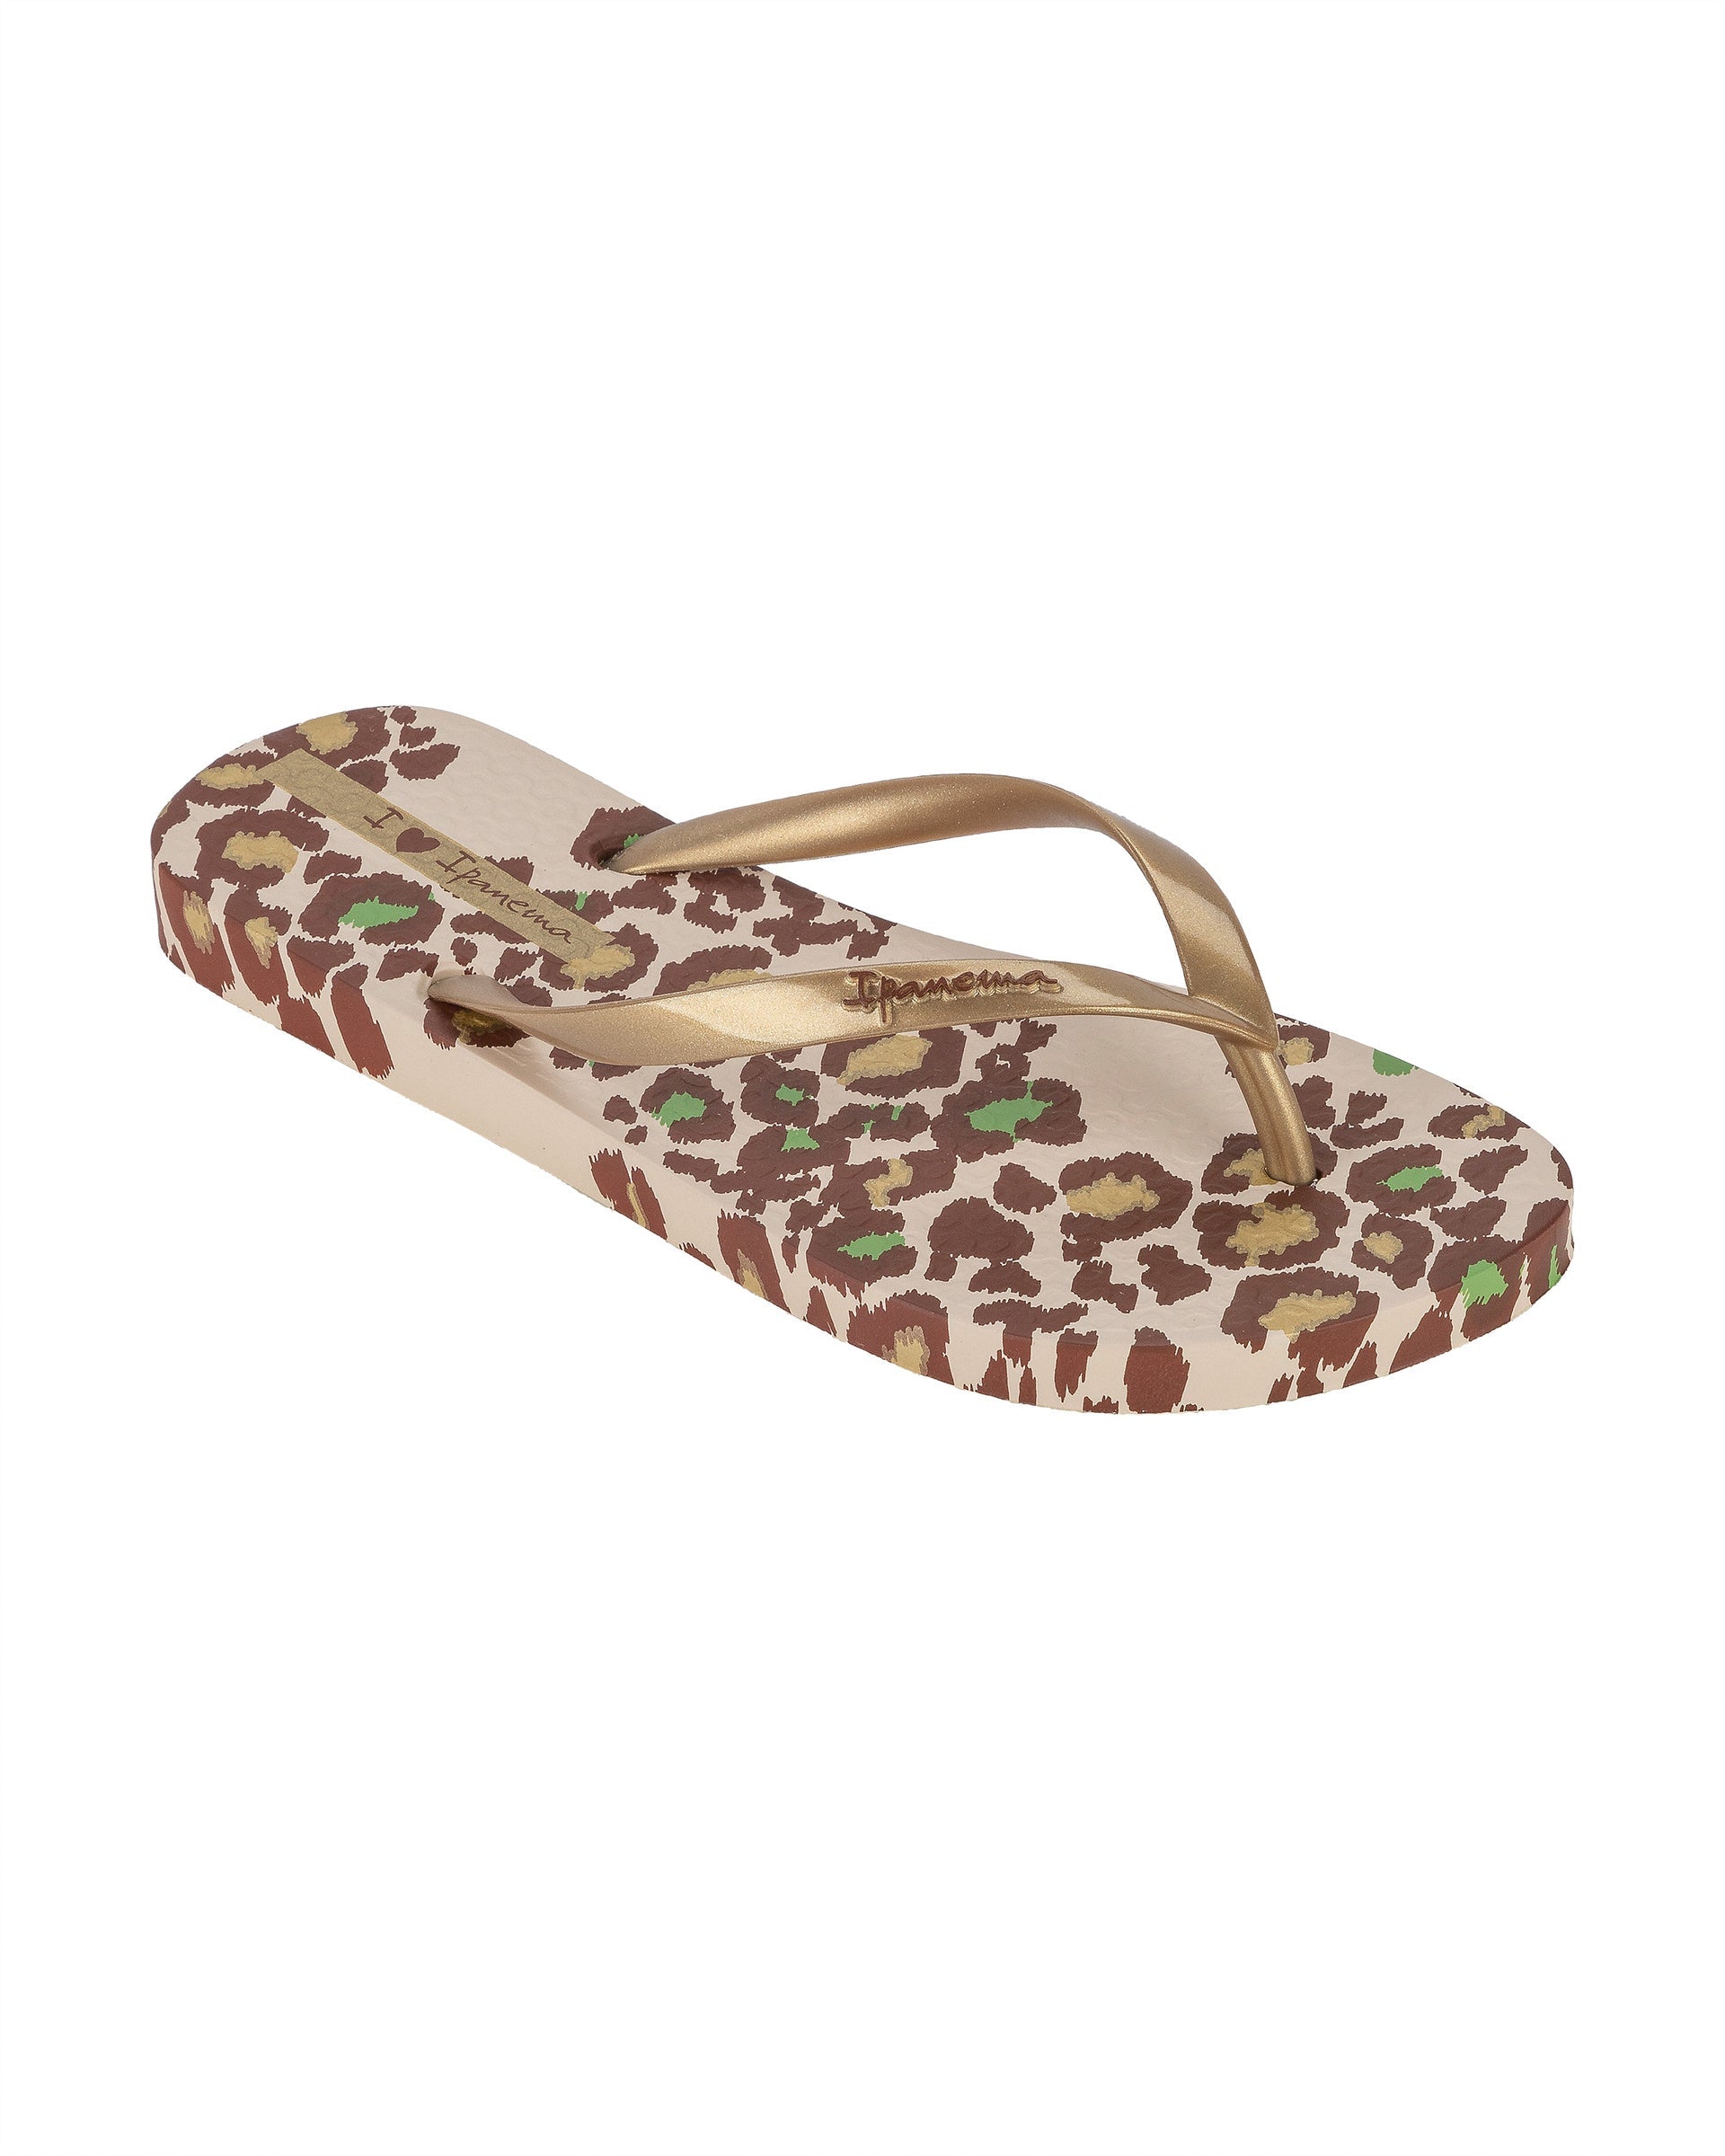 Angled view of a beige Ipanema Animal Print women's flip flop with glitter gold straps and leopard sole print.